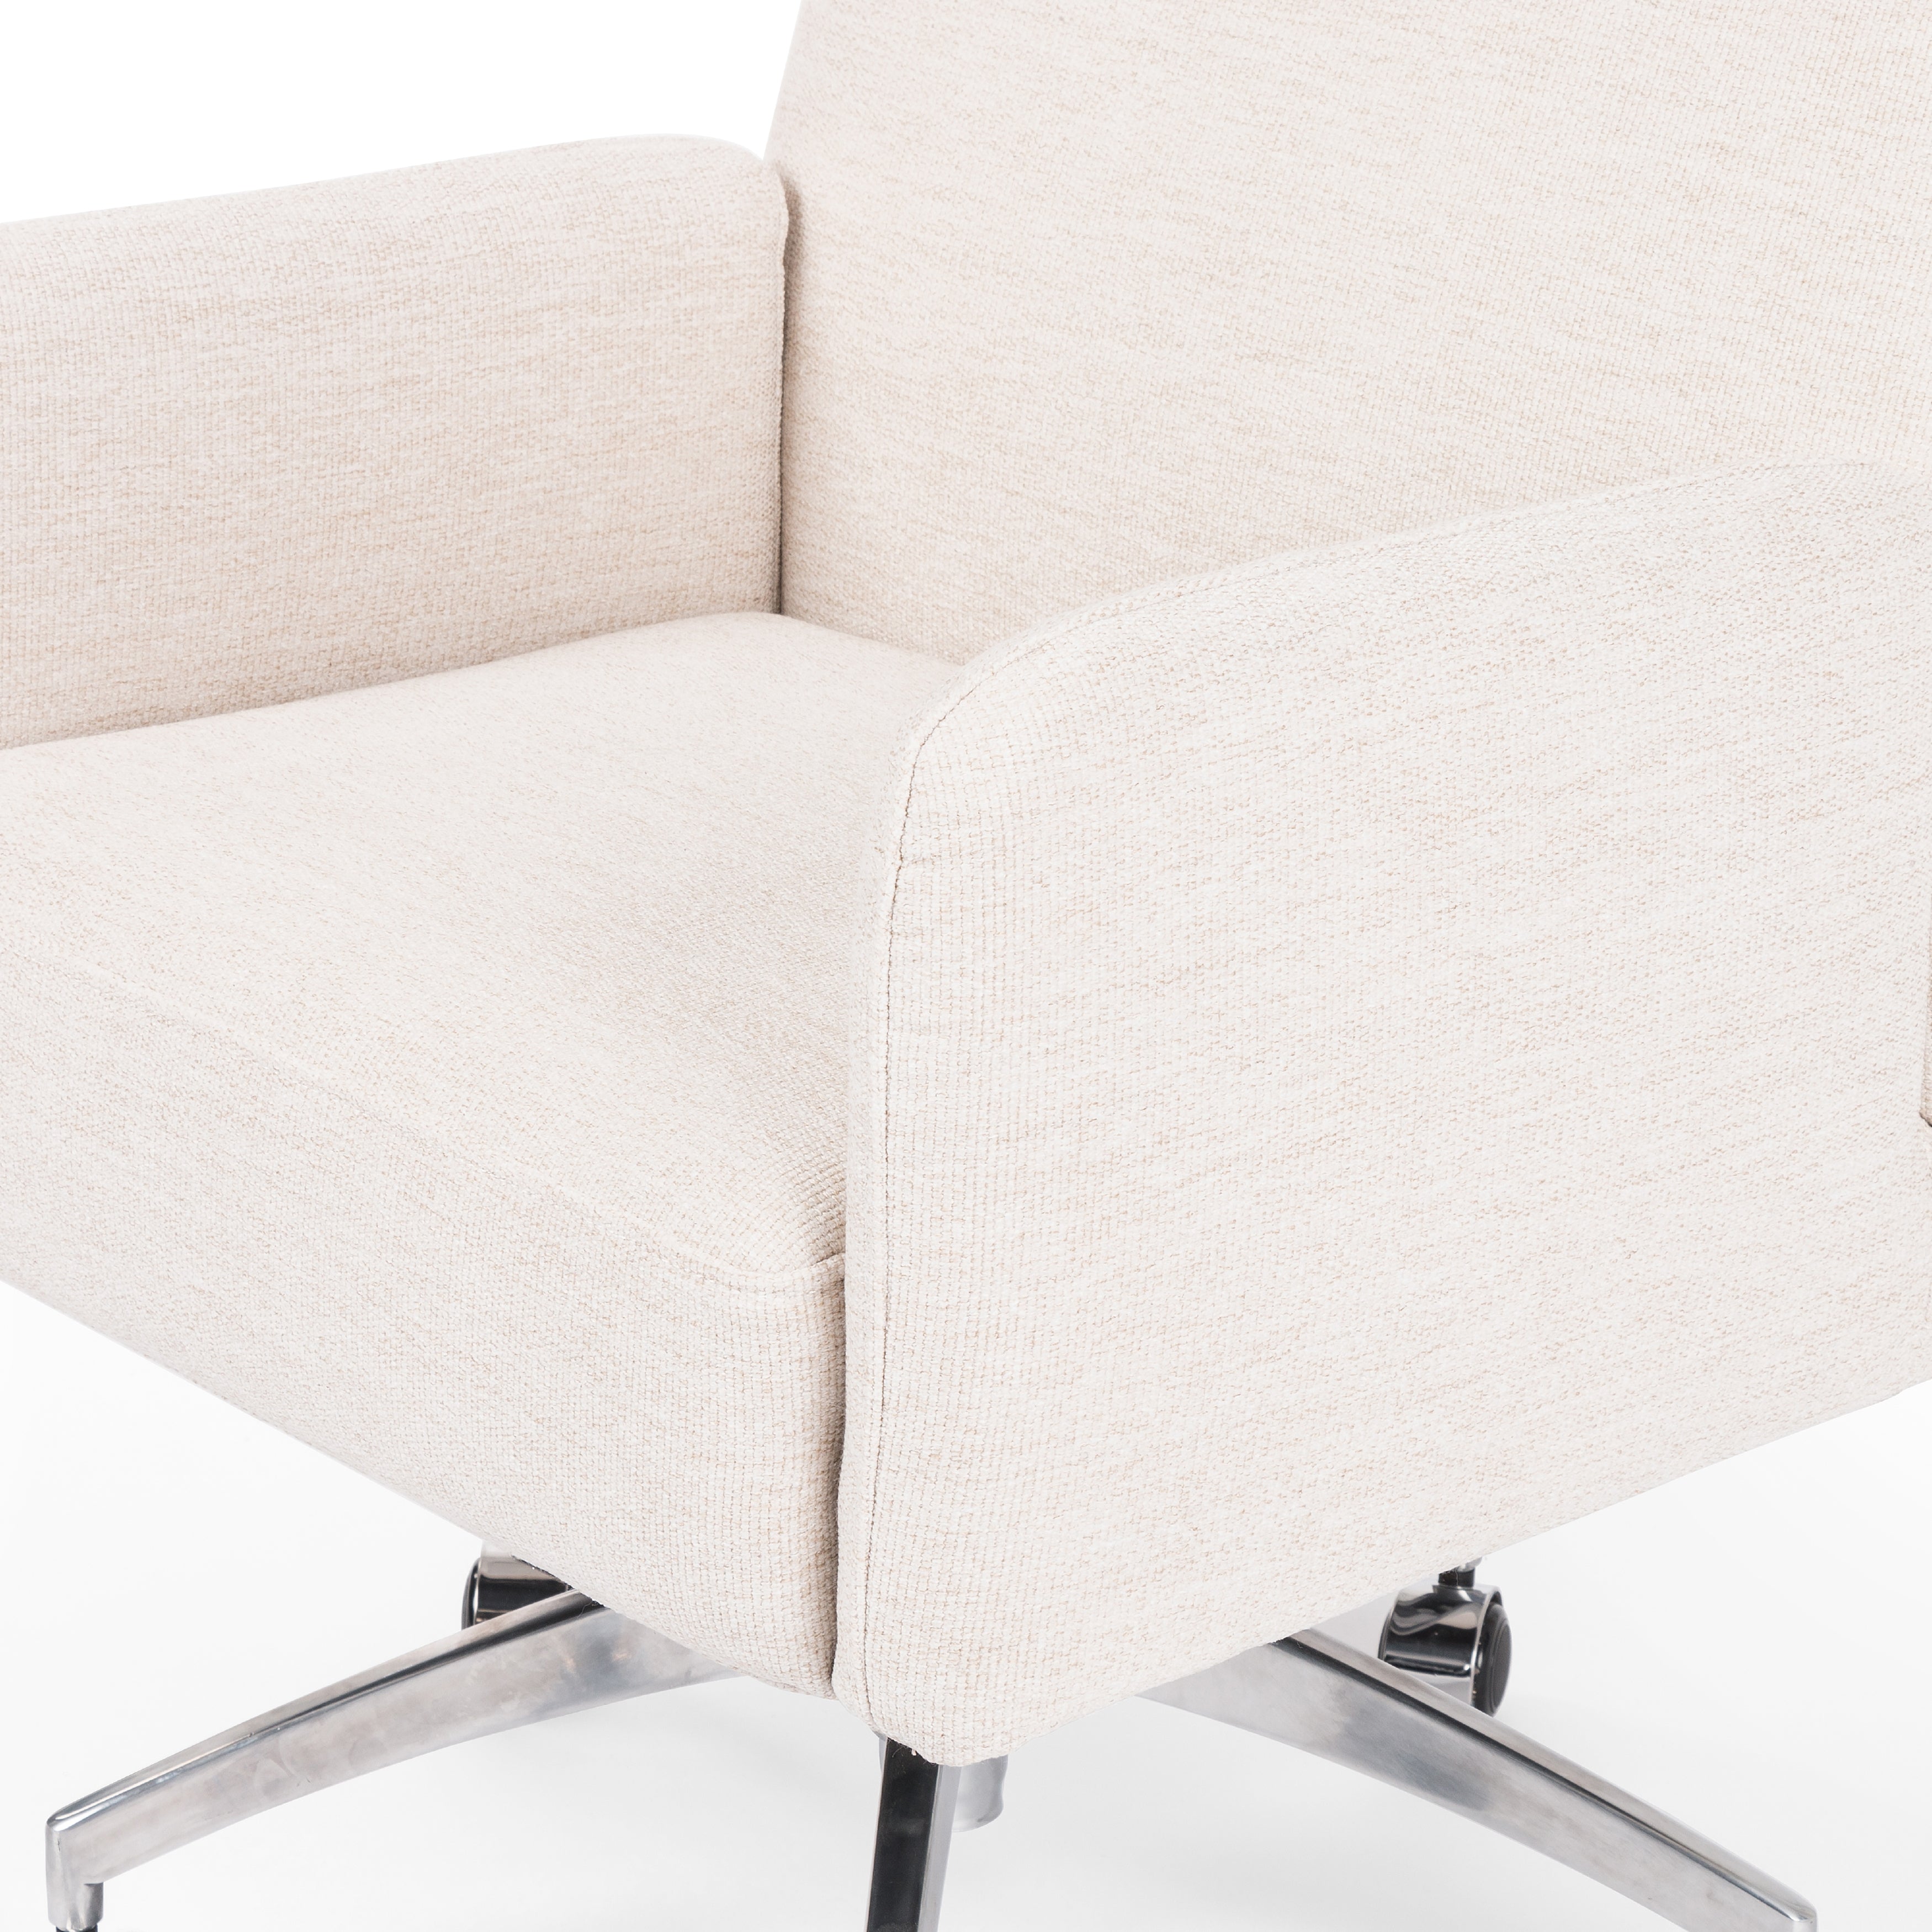 Andrus Desk Chair - StyleMeGHD - Desk Chairs